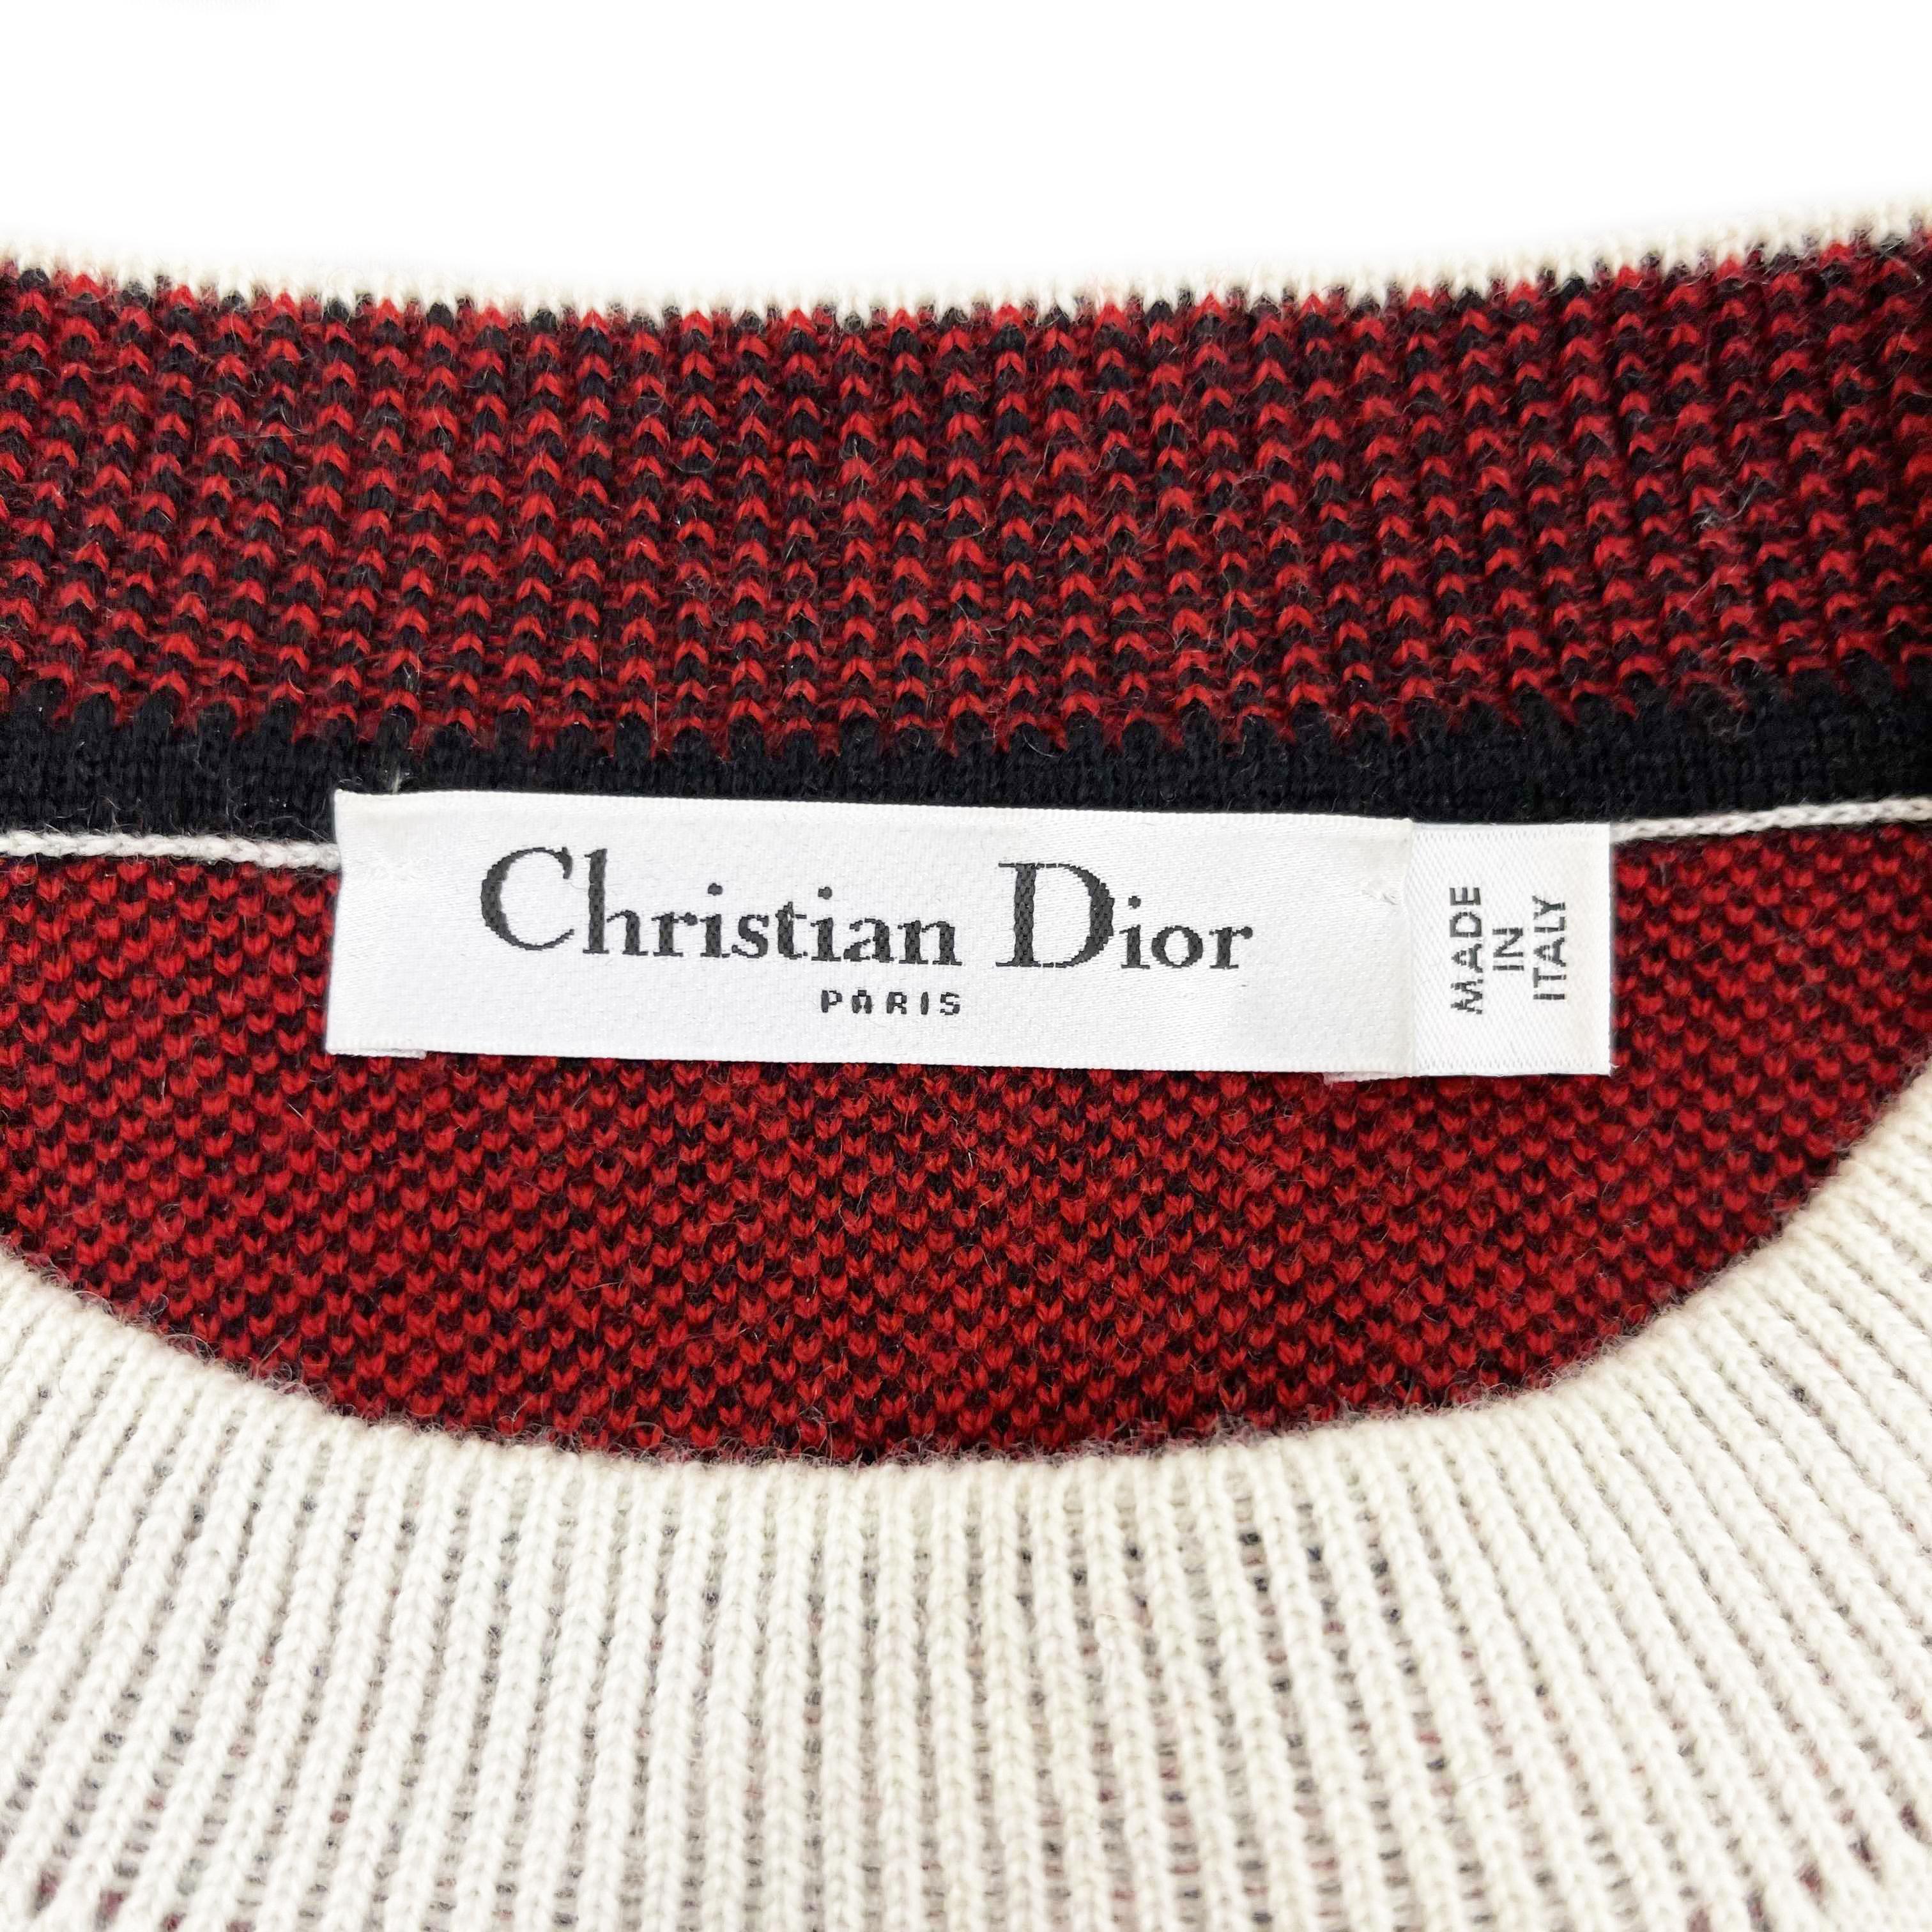 Christian Dior 2019 Dioramour Capsule Collection Sweater Ivory 34 US 2 1